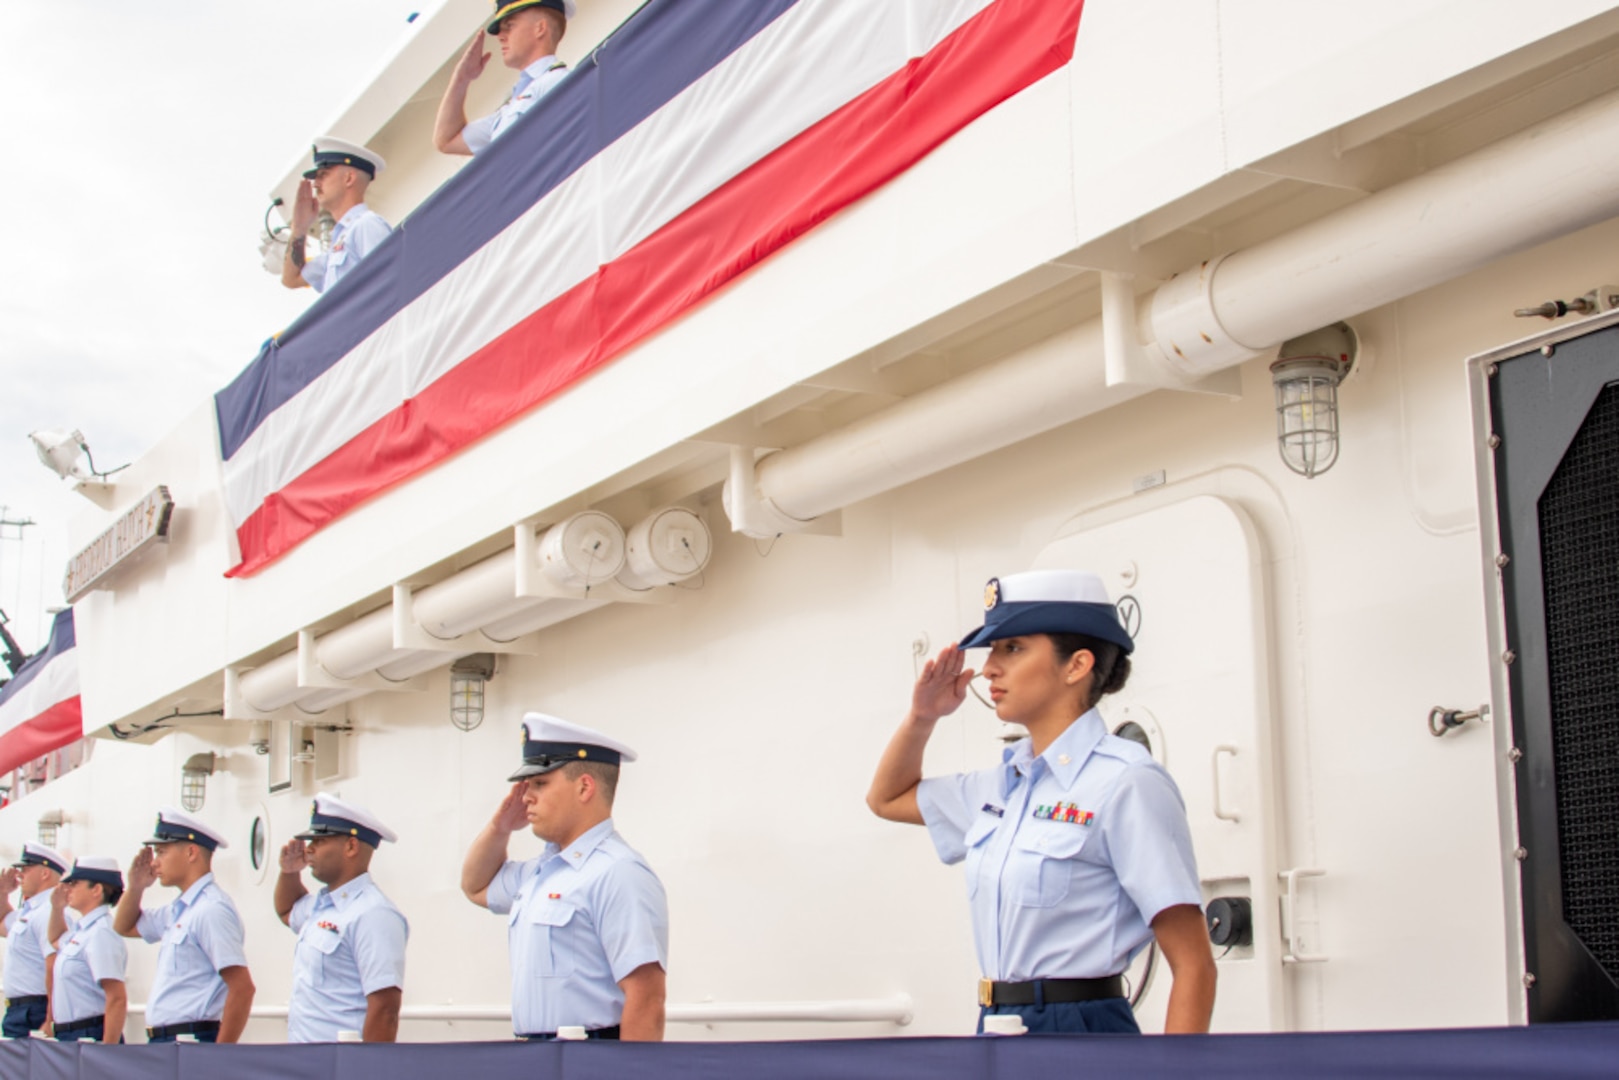 The crew of Coast Guard Cutter Fredrick Hatch salute during a rare triple-commissioning ceremony at Coast Guard Sector Guam July 29, 2021. During the ceremony, Coast Guard Cutters Myrtle Hazard, Oliver Henry and Fredrick Hatch were commissioned.